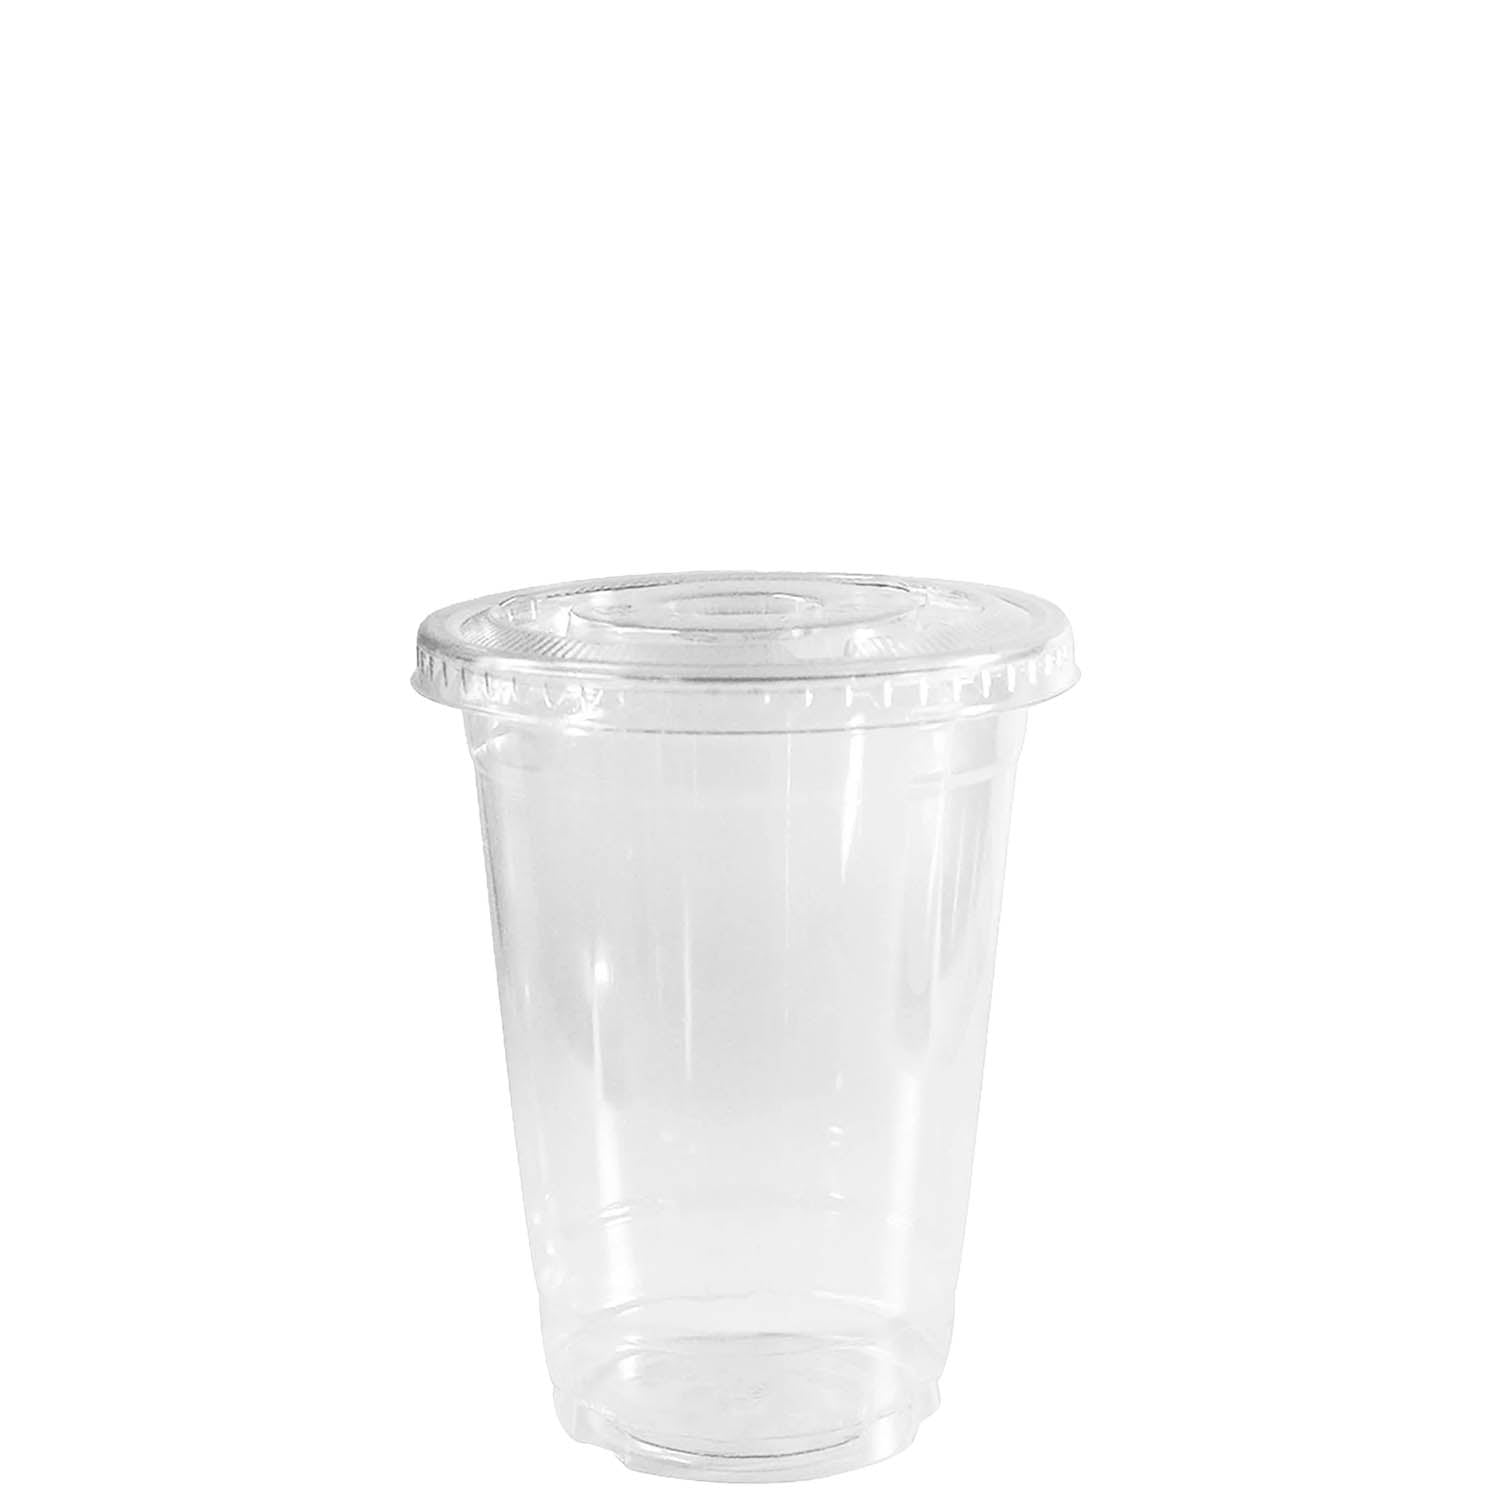 Plastic Cups with Lids - 12 oz - BPA-Free Clear Plastic Cups - Rolled Rim  Disposable Coffee Cups - C…See more Plastic Cups with Lids - 12 oz 